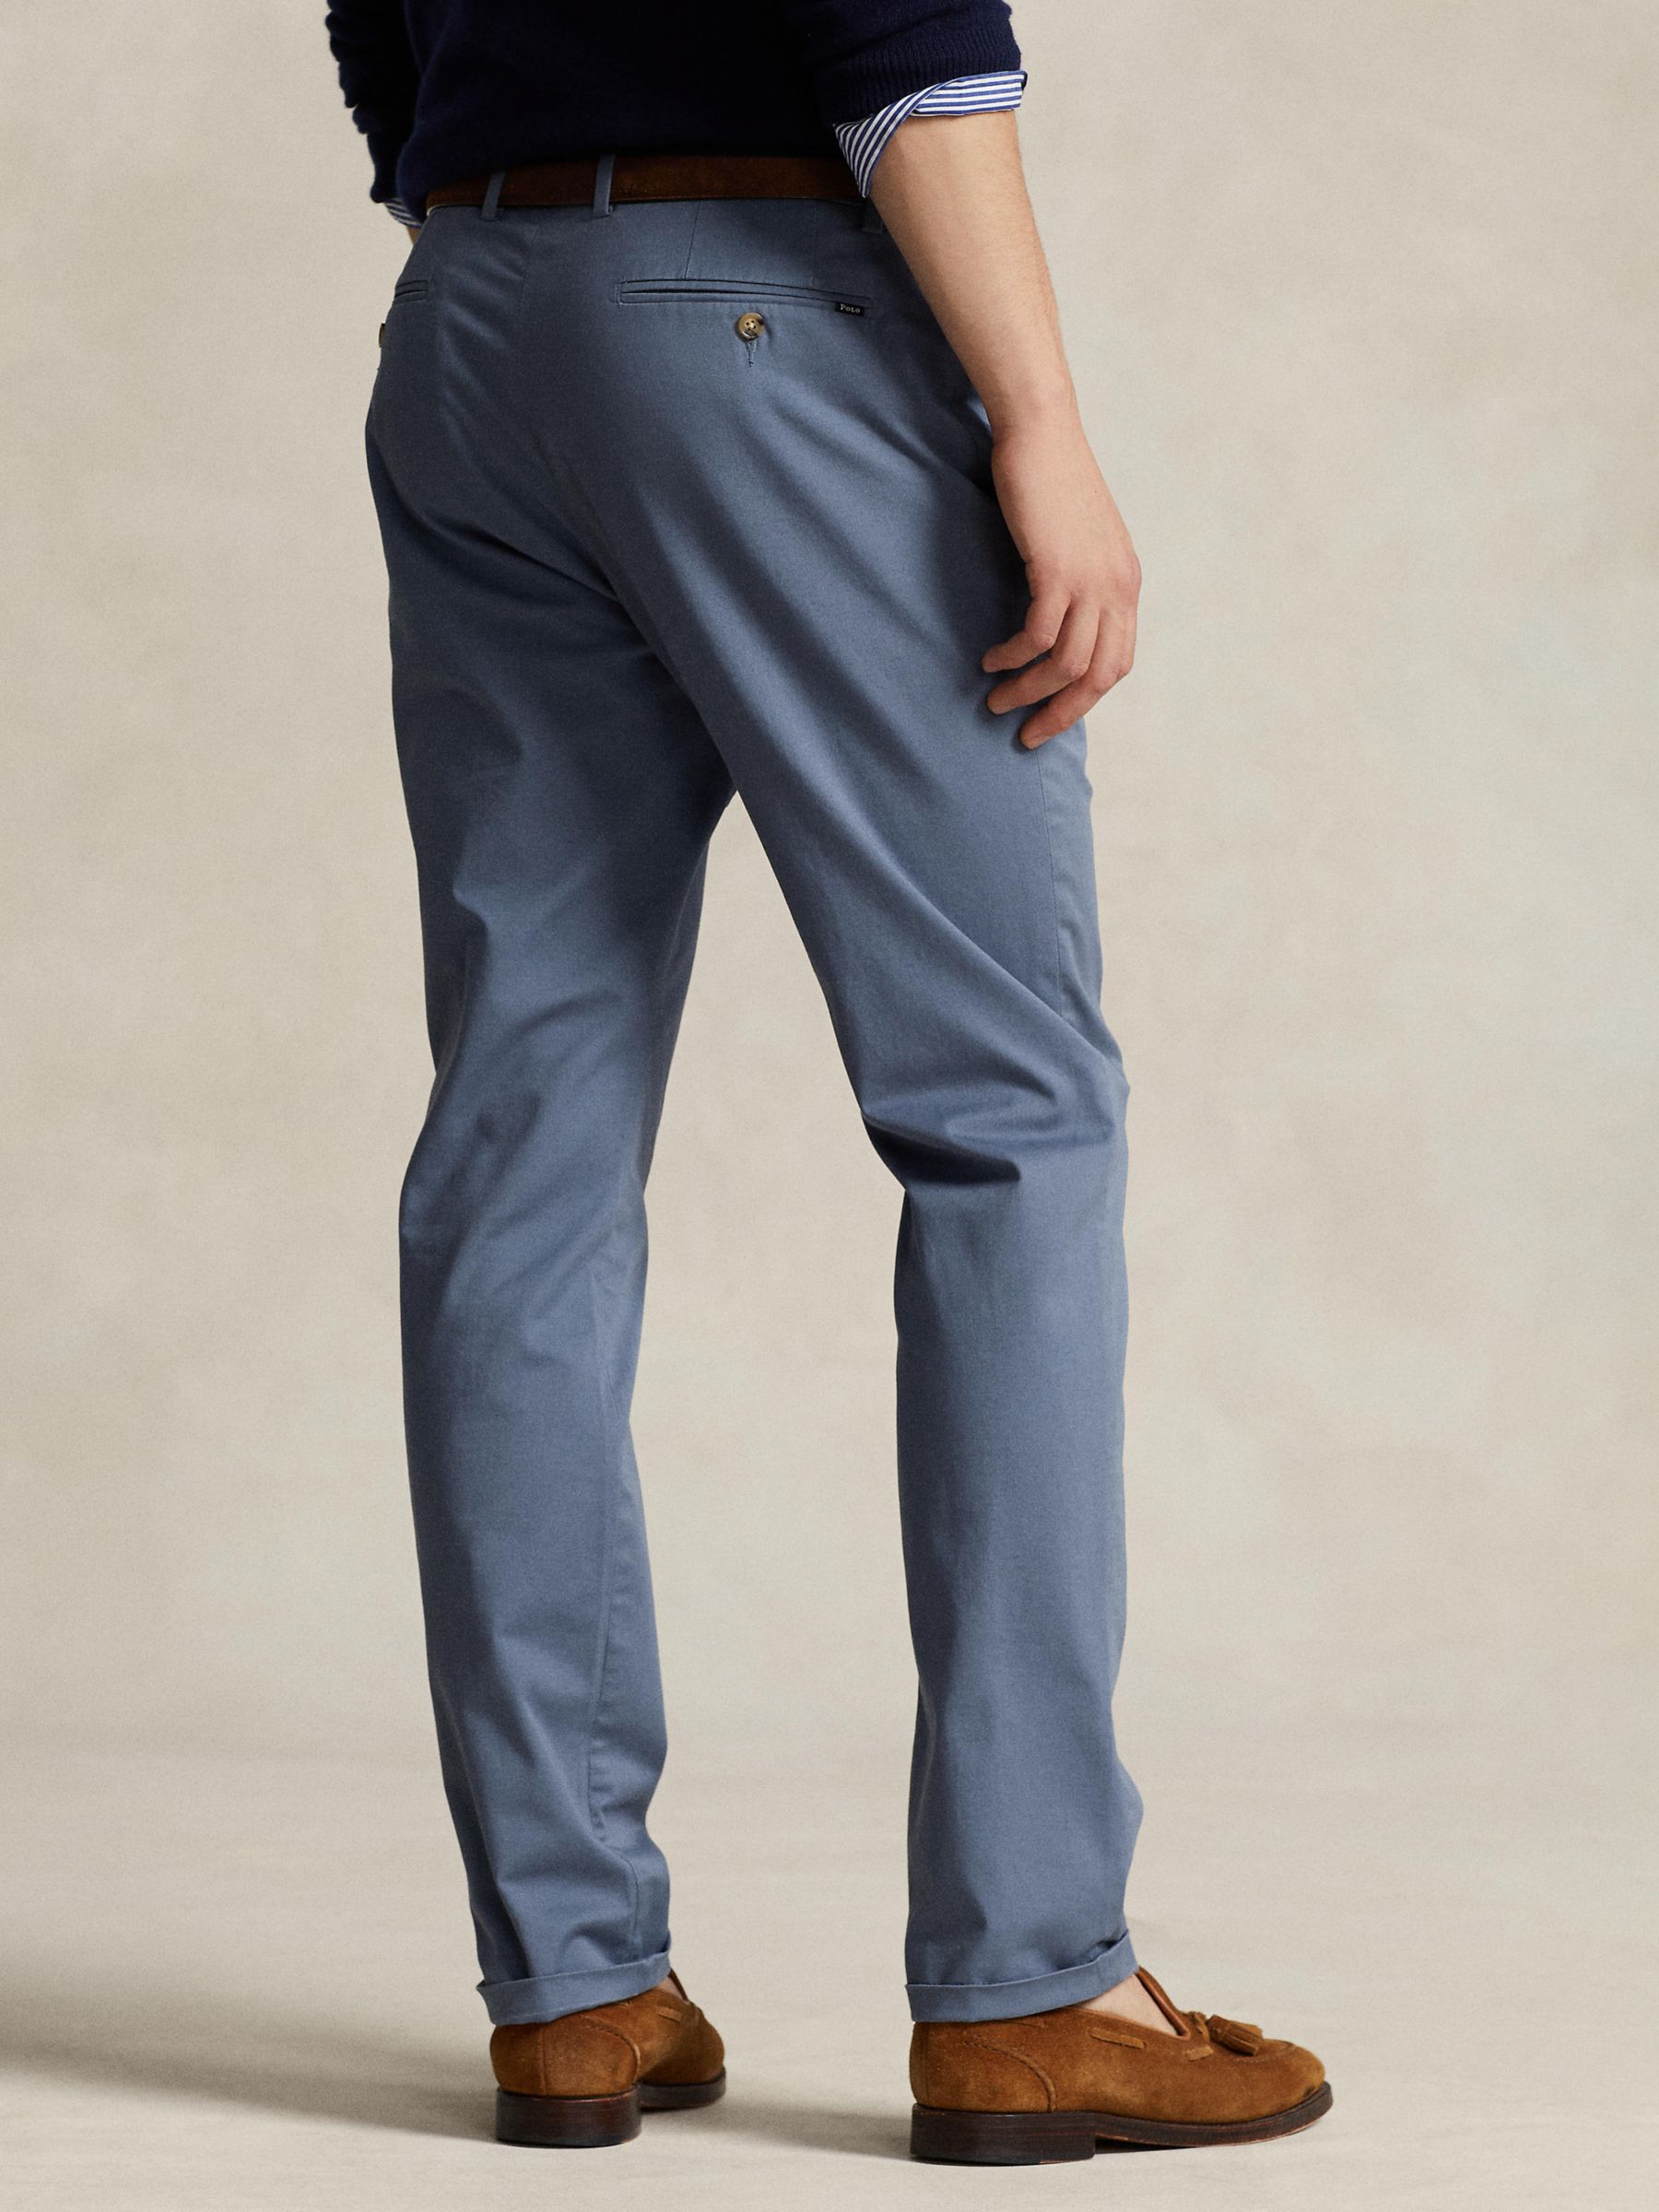 Ralph Lauren Slim Stretch Chino Trousers, Bay Blue at John Lewis & Partners